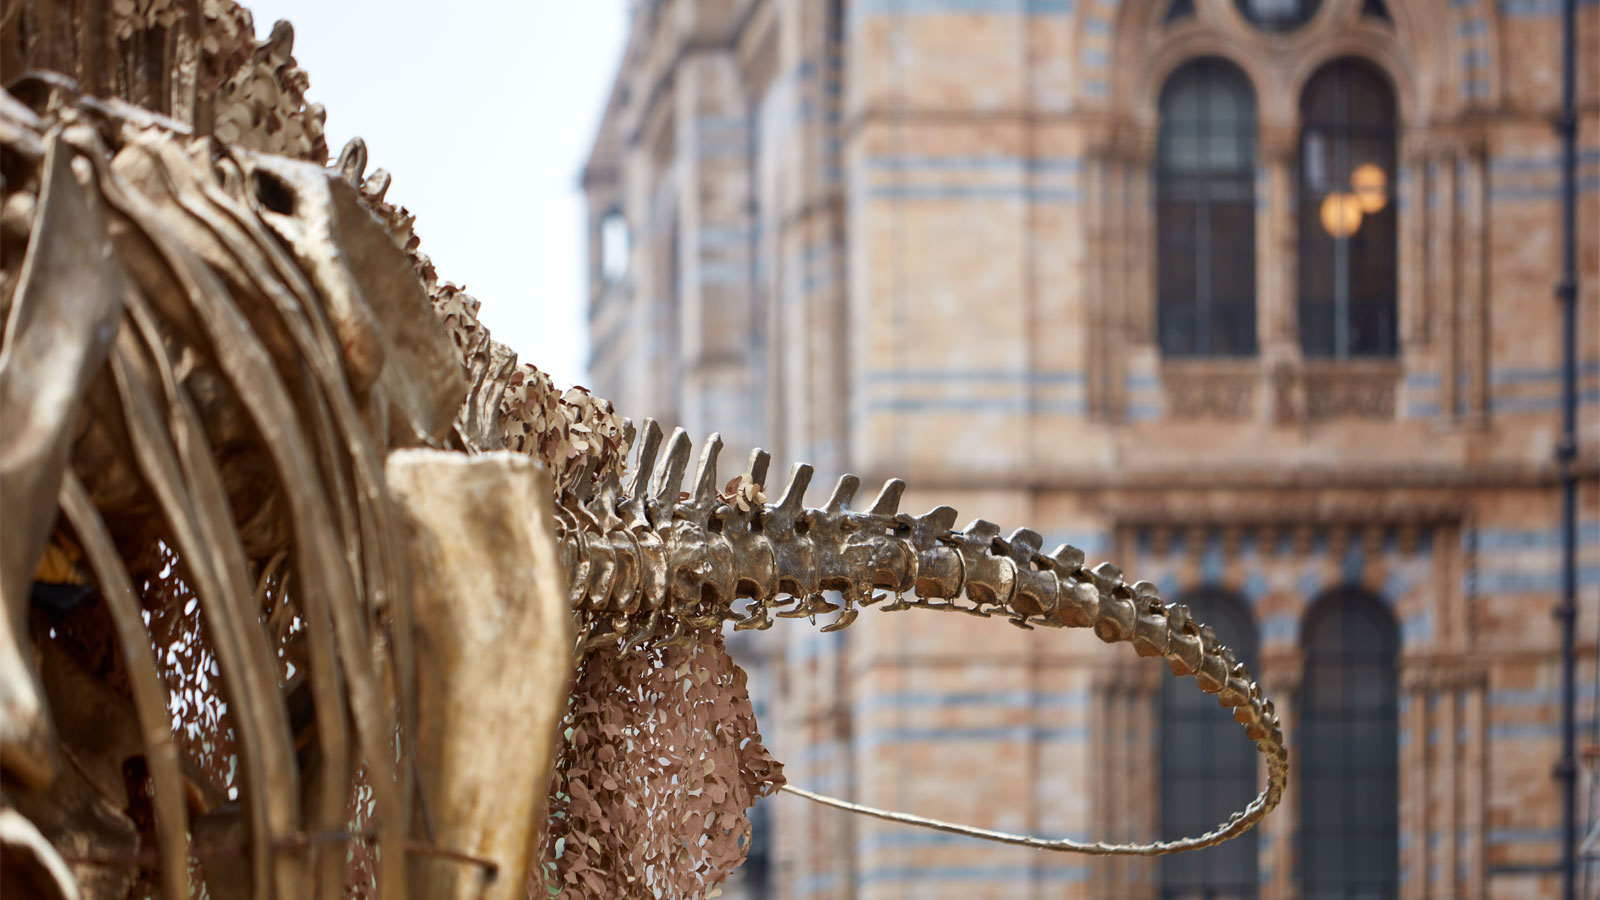 Transformed Natural History Museum gardens to reopen in July